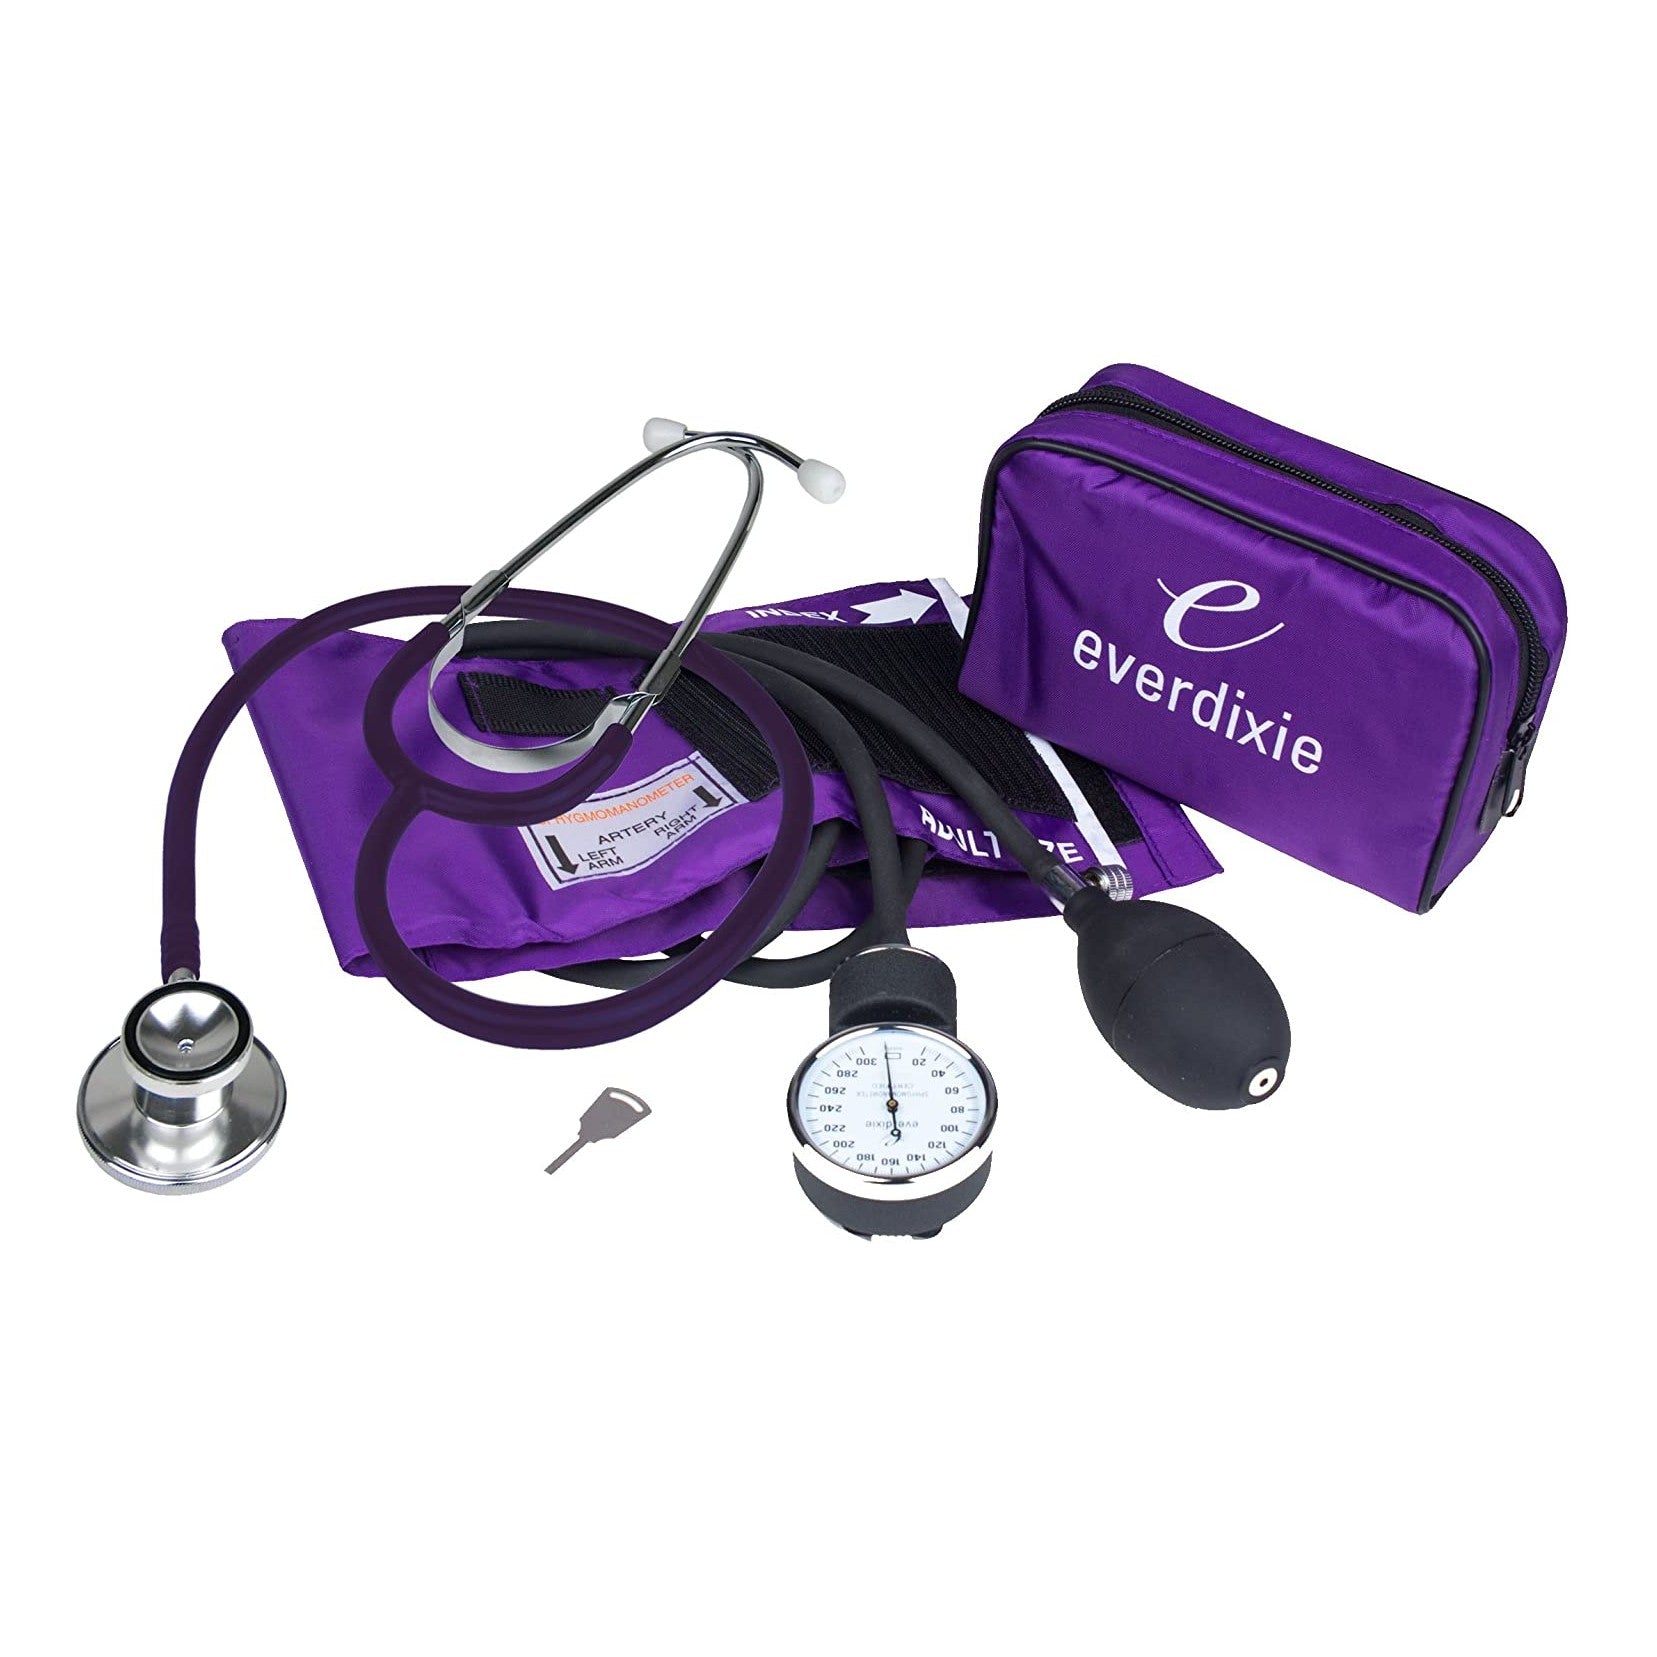 Dixie EMS Aneroid Sphygmomanometer Kit, Manual Blood Pressure Monitor Set with 5 Cuffs for Infant, Child, Adult, Large Adult, Thigh, & Carrying Case